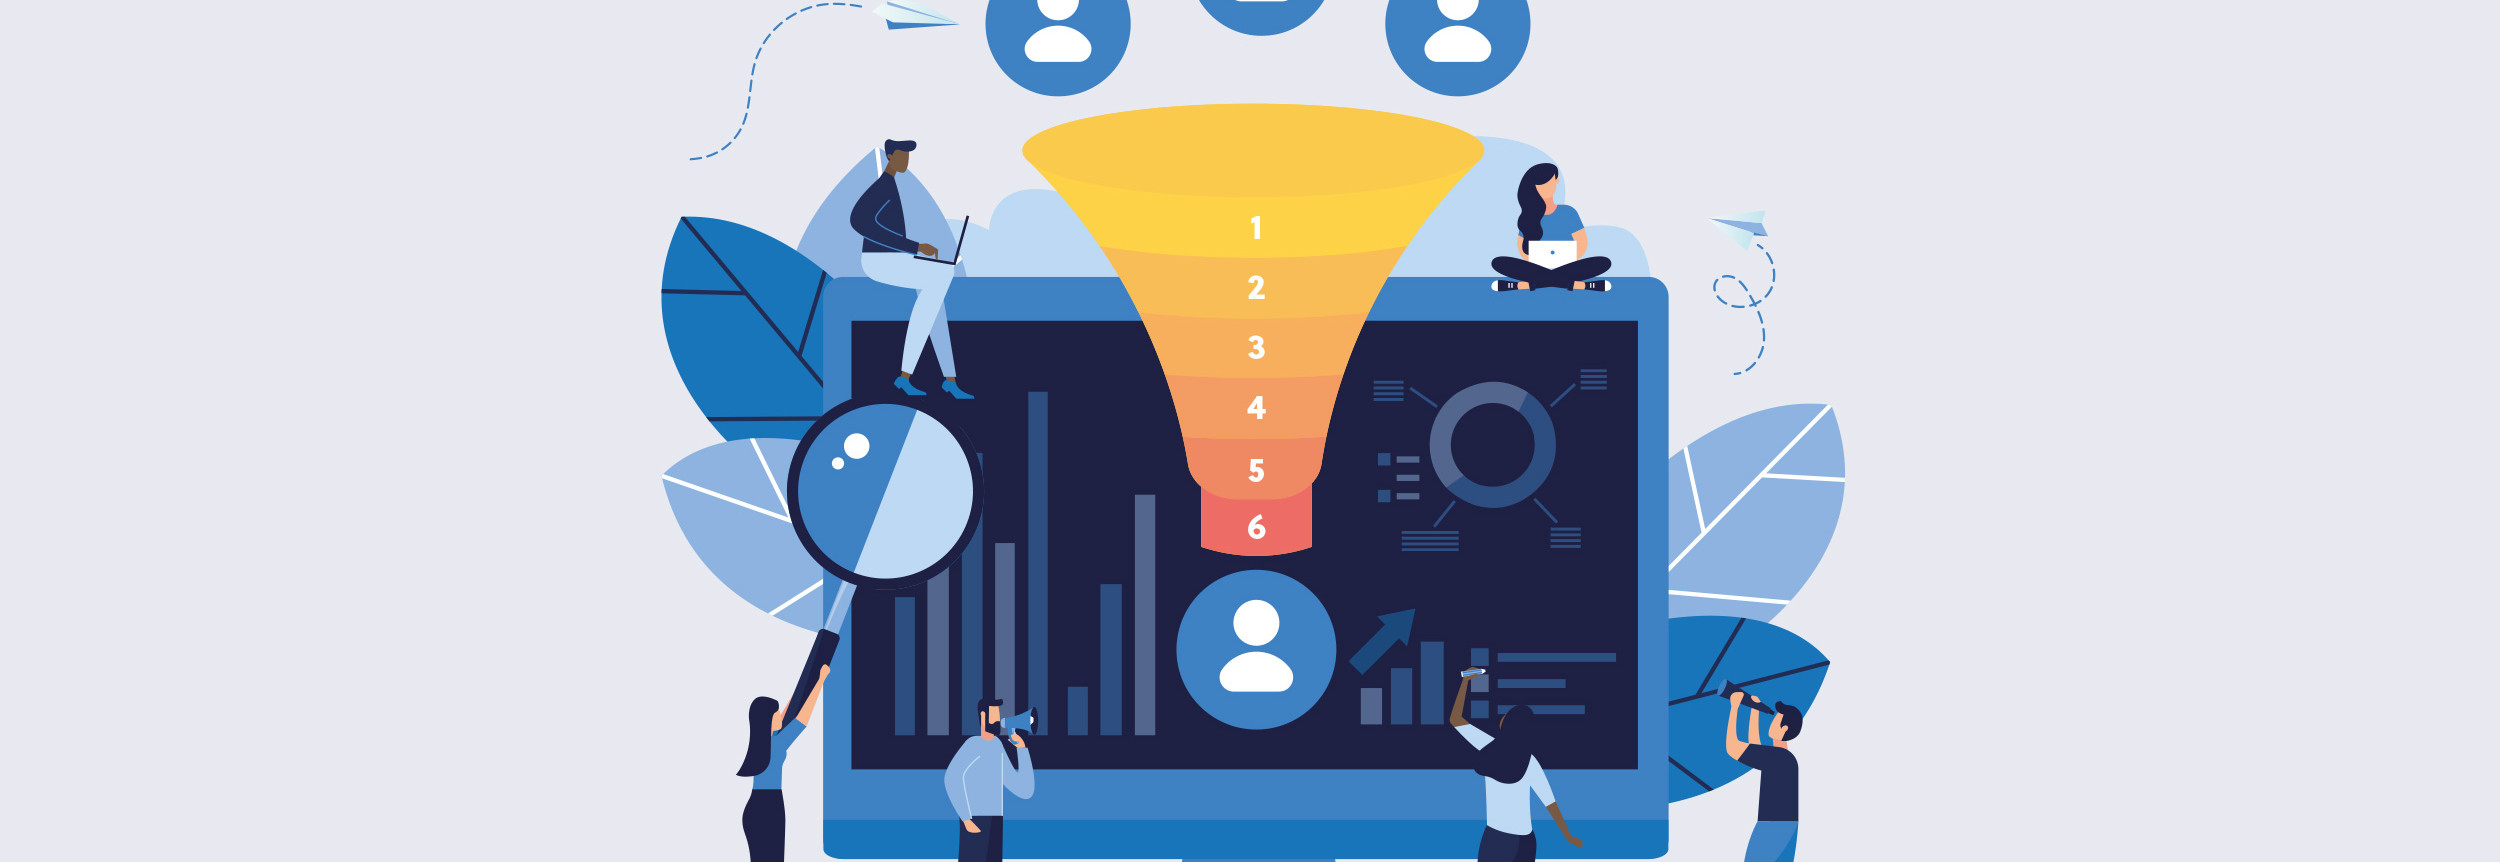 visualization of the marketing funnel